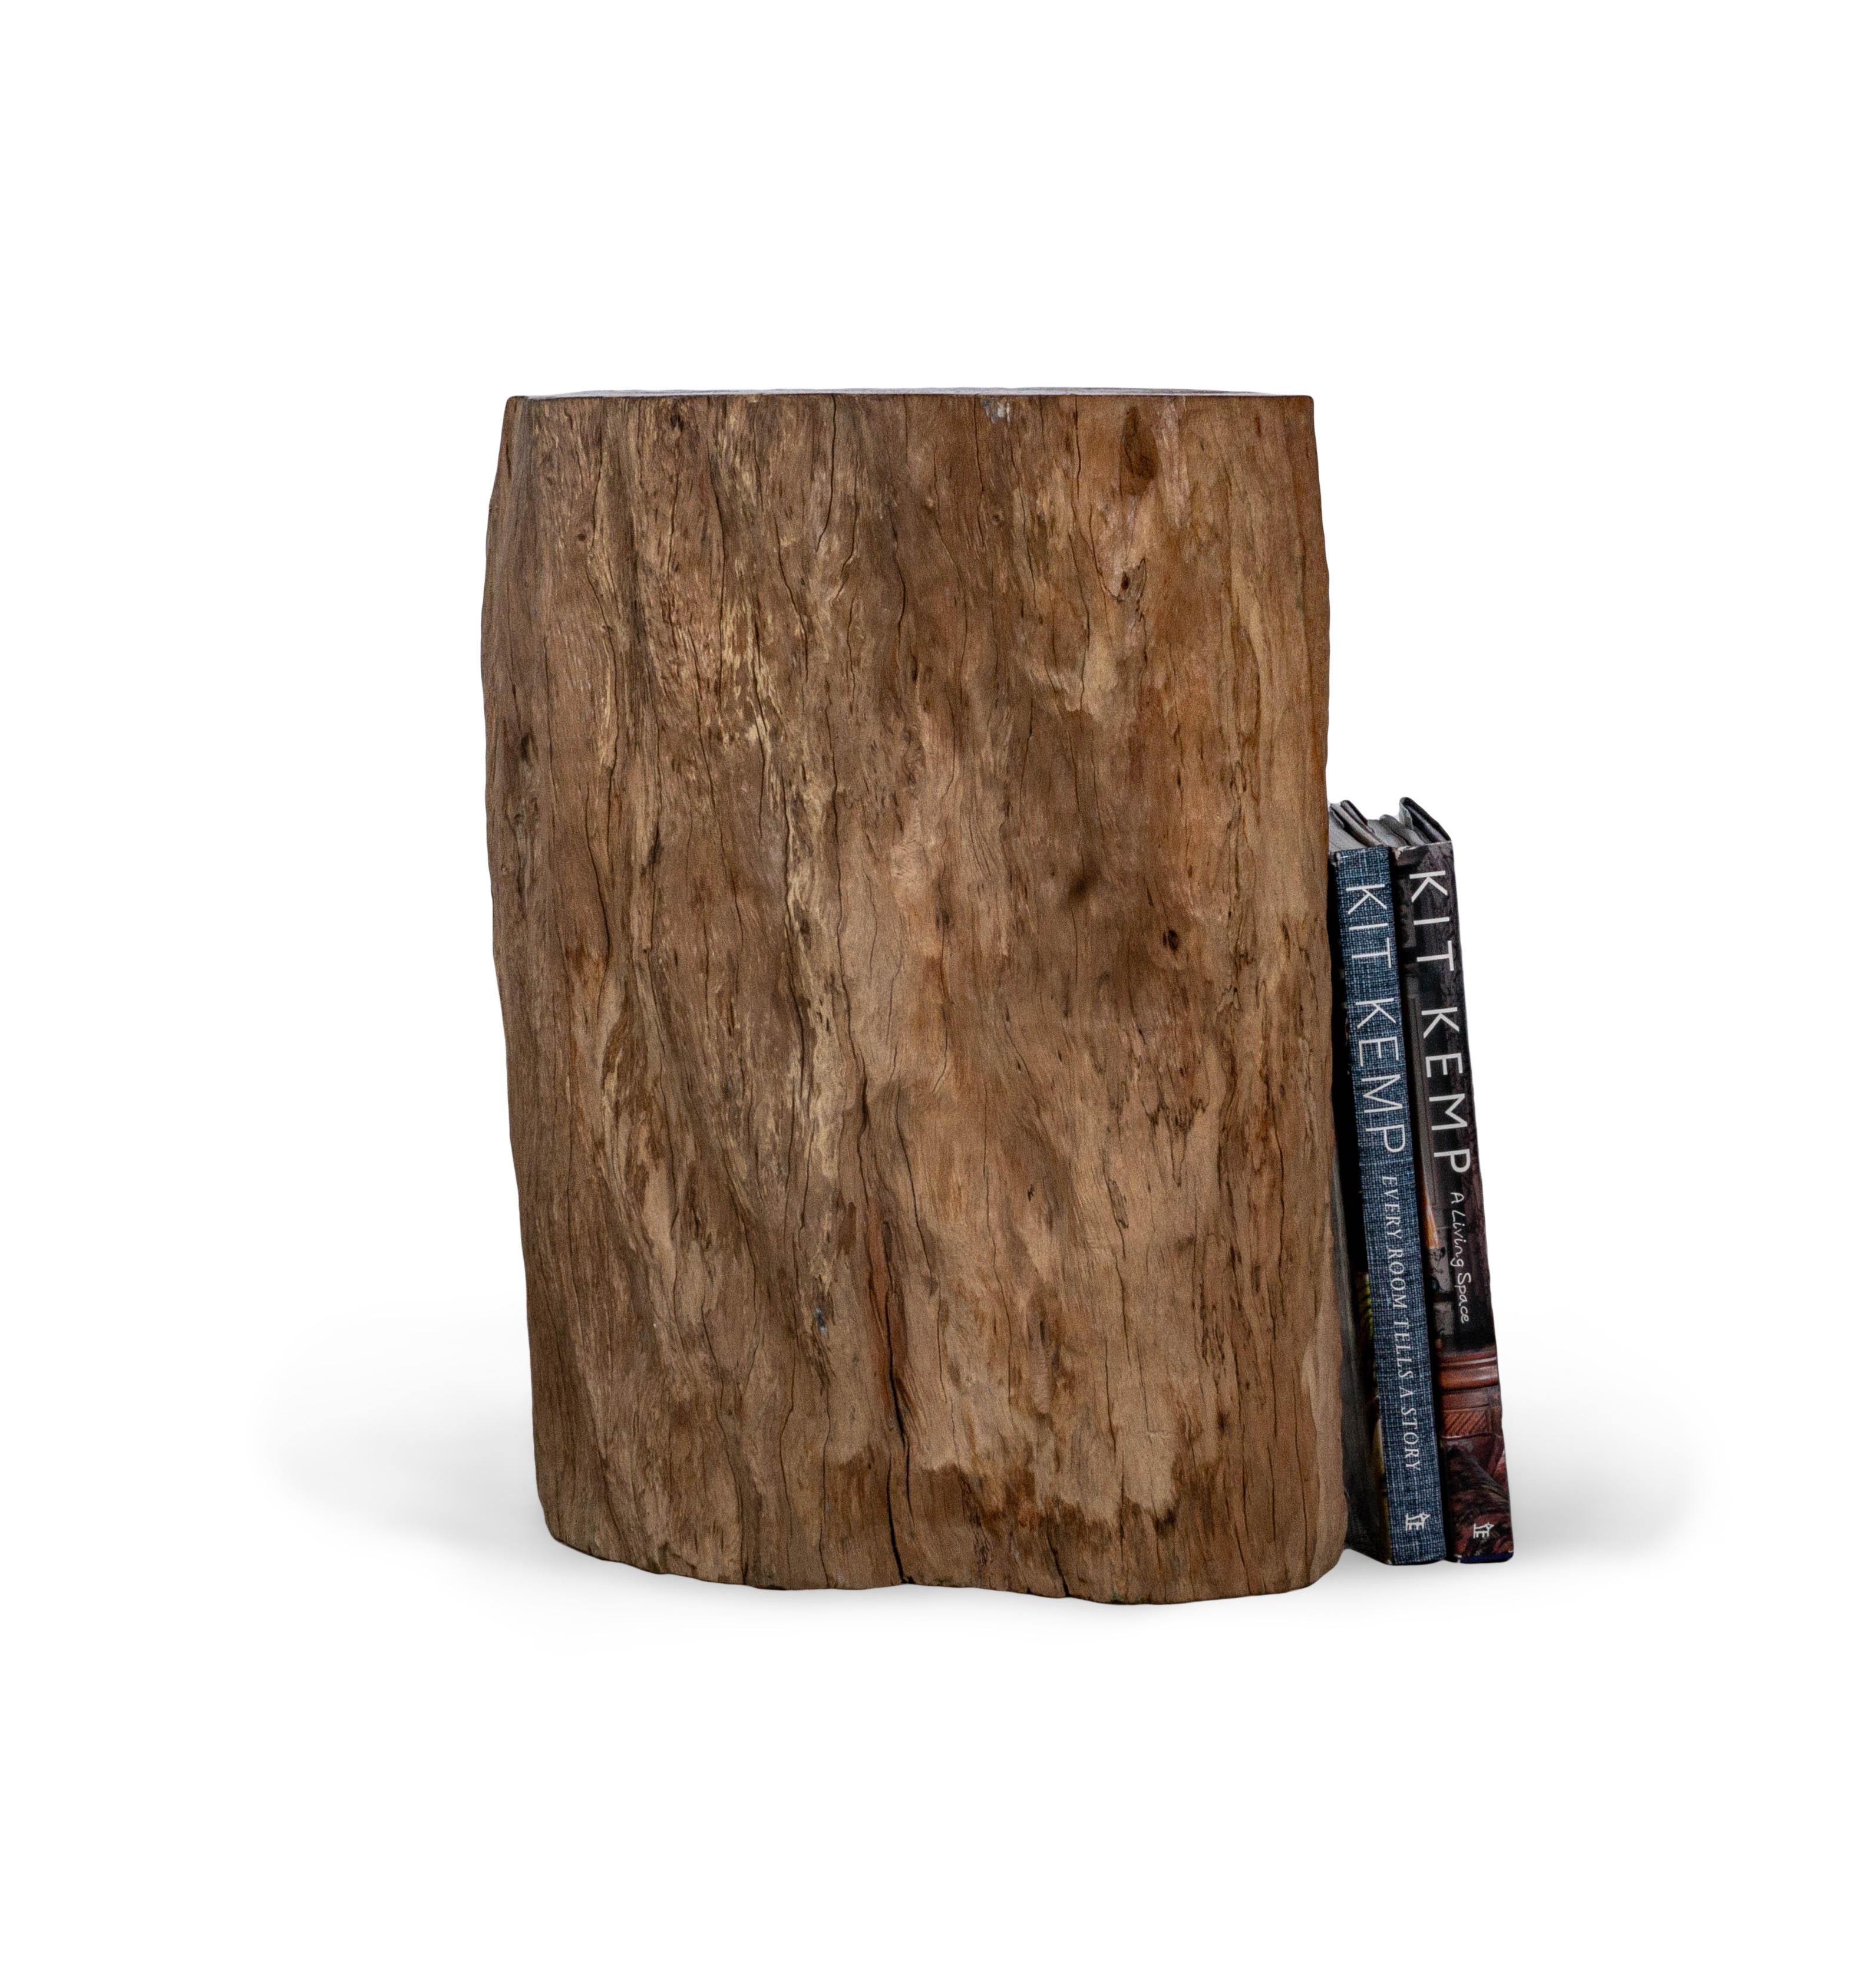 This organic form lychee wood side table offers a one of a kind shape found only in nature making it the perfect way to bring the outdoors in. Offering a beautiful cider toned hue, this lychee wood side table is also a great way to ad warmth into